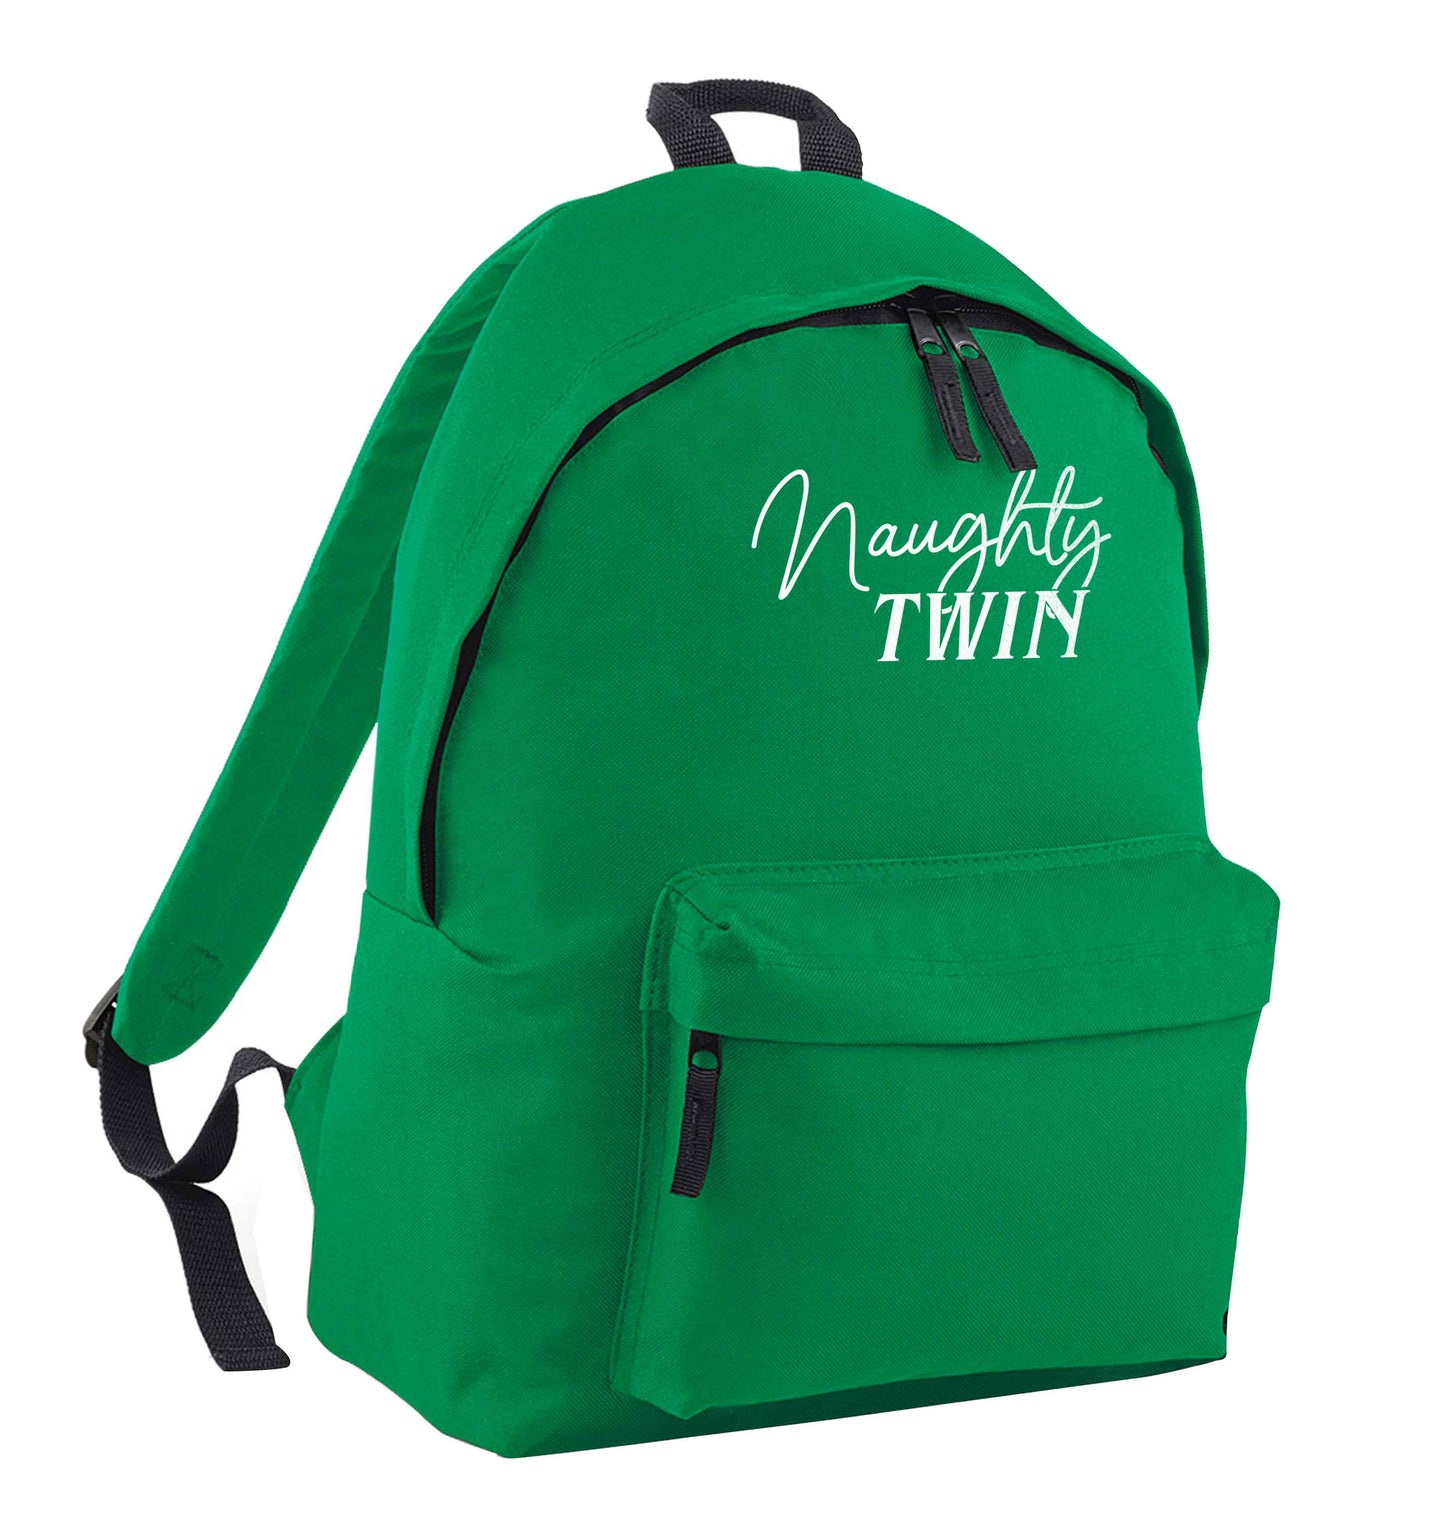 Naughty twin green adults backpack